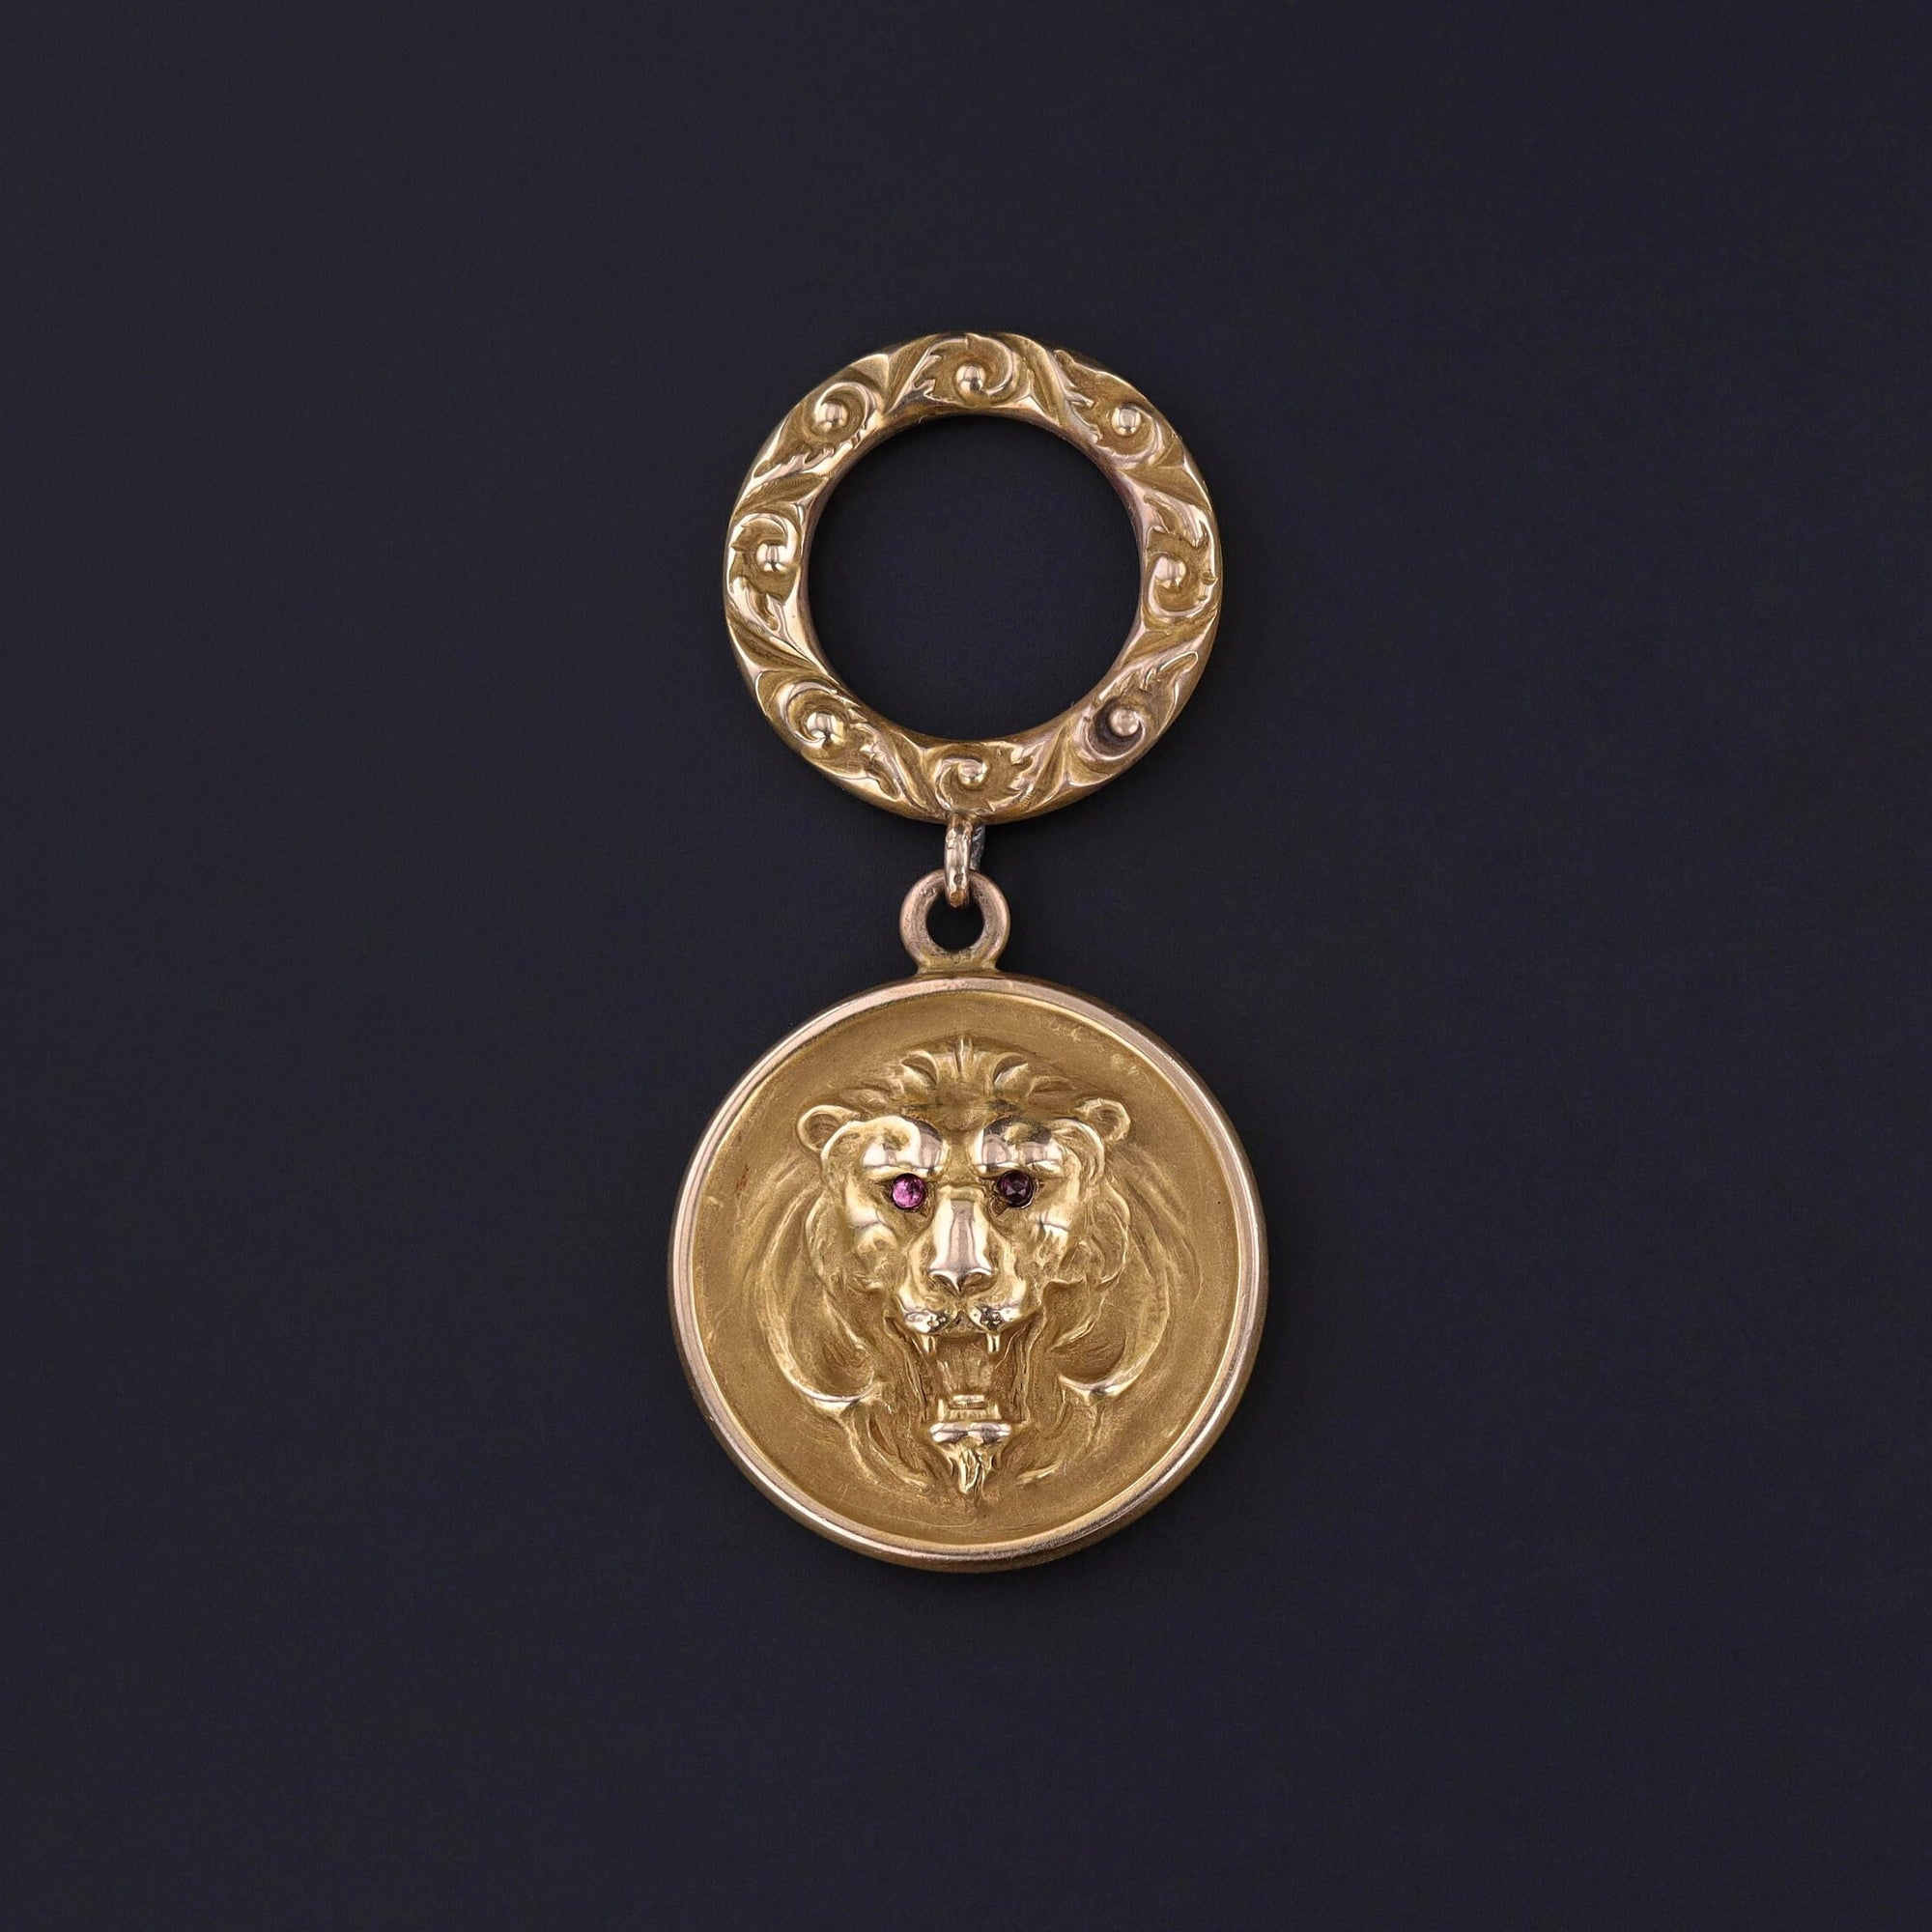 Antique Gold Lion Pendant: Discover the regal elegance of this antique 10k gold pendant (circa 1890-1900) boasting a majestic lion motif hanging from an embossed bolt ring. The reverse is inscribed with the initials &#39;VRH&#39;.